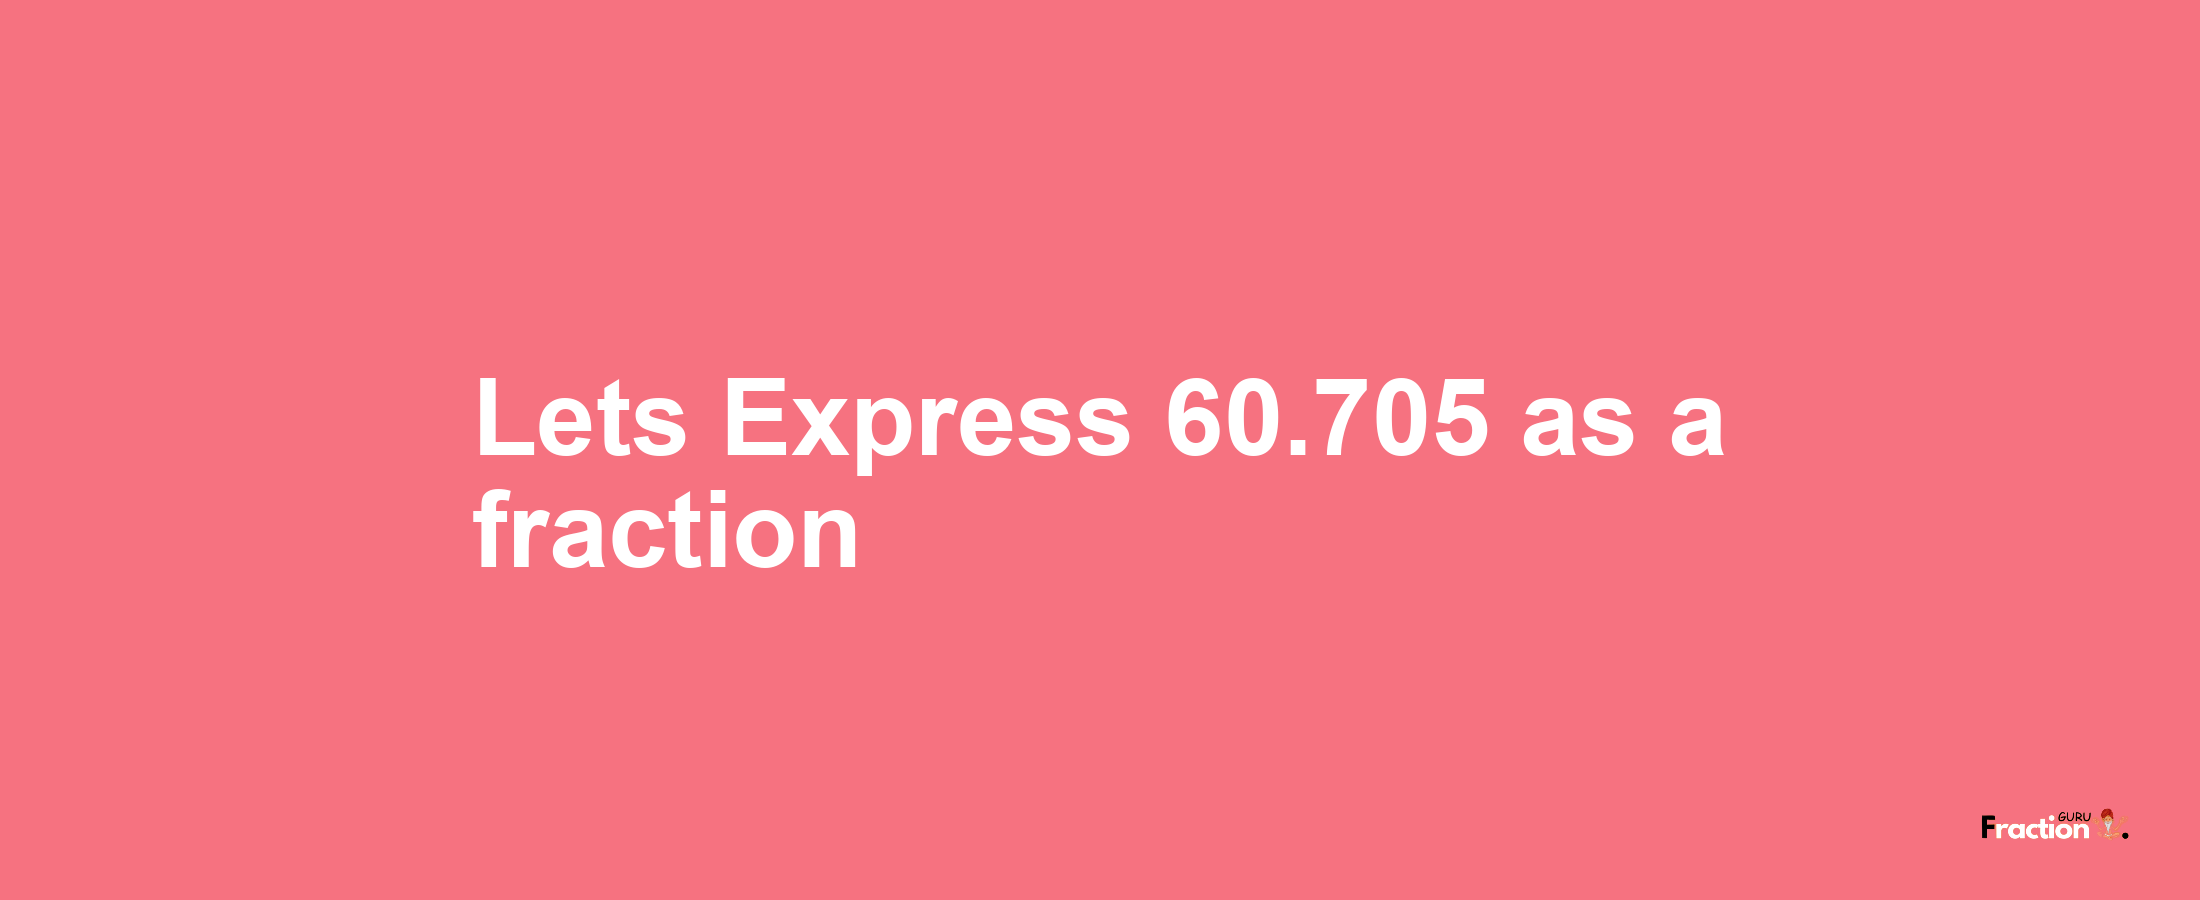 Lets Express 60.705 as afraction